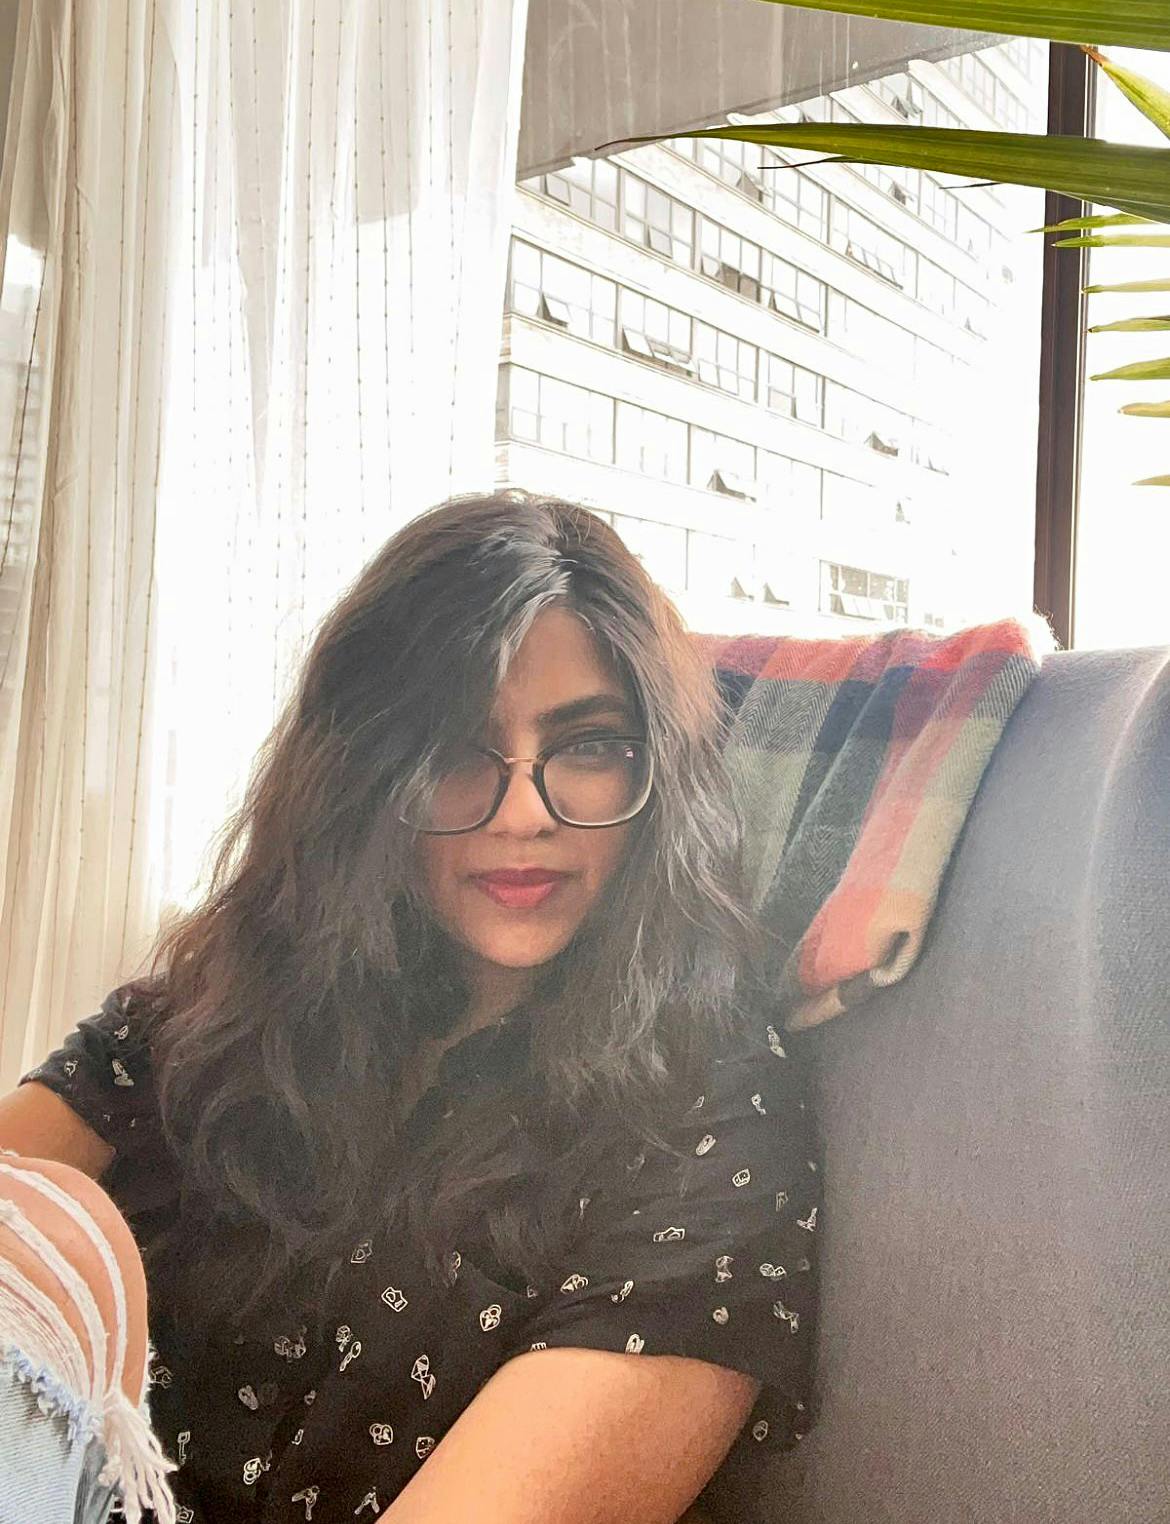 A photo of Aakansha Ghosh. She is seated on a gray couch wearing a black patterned top and dark rimmed glasses.